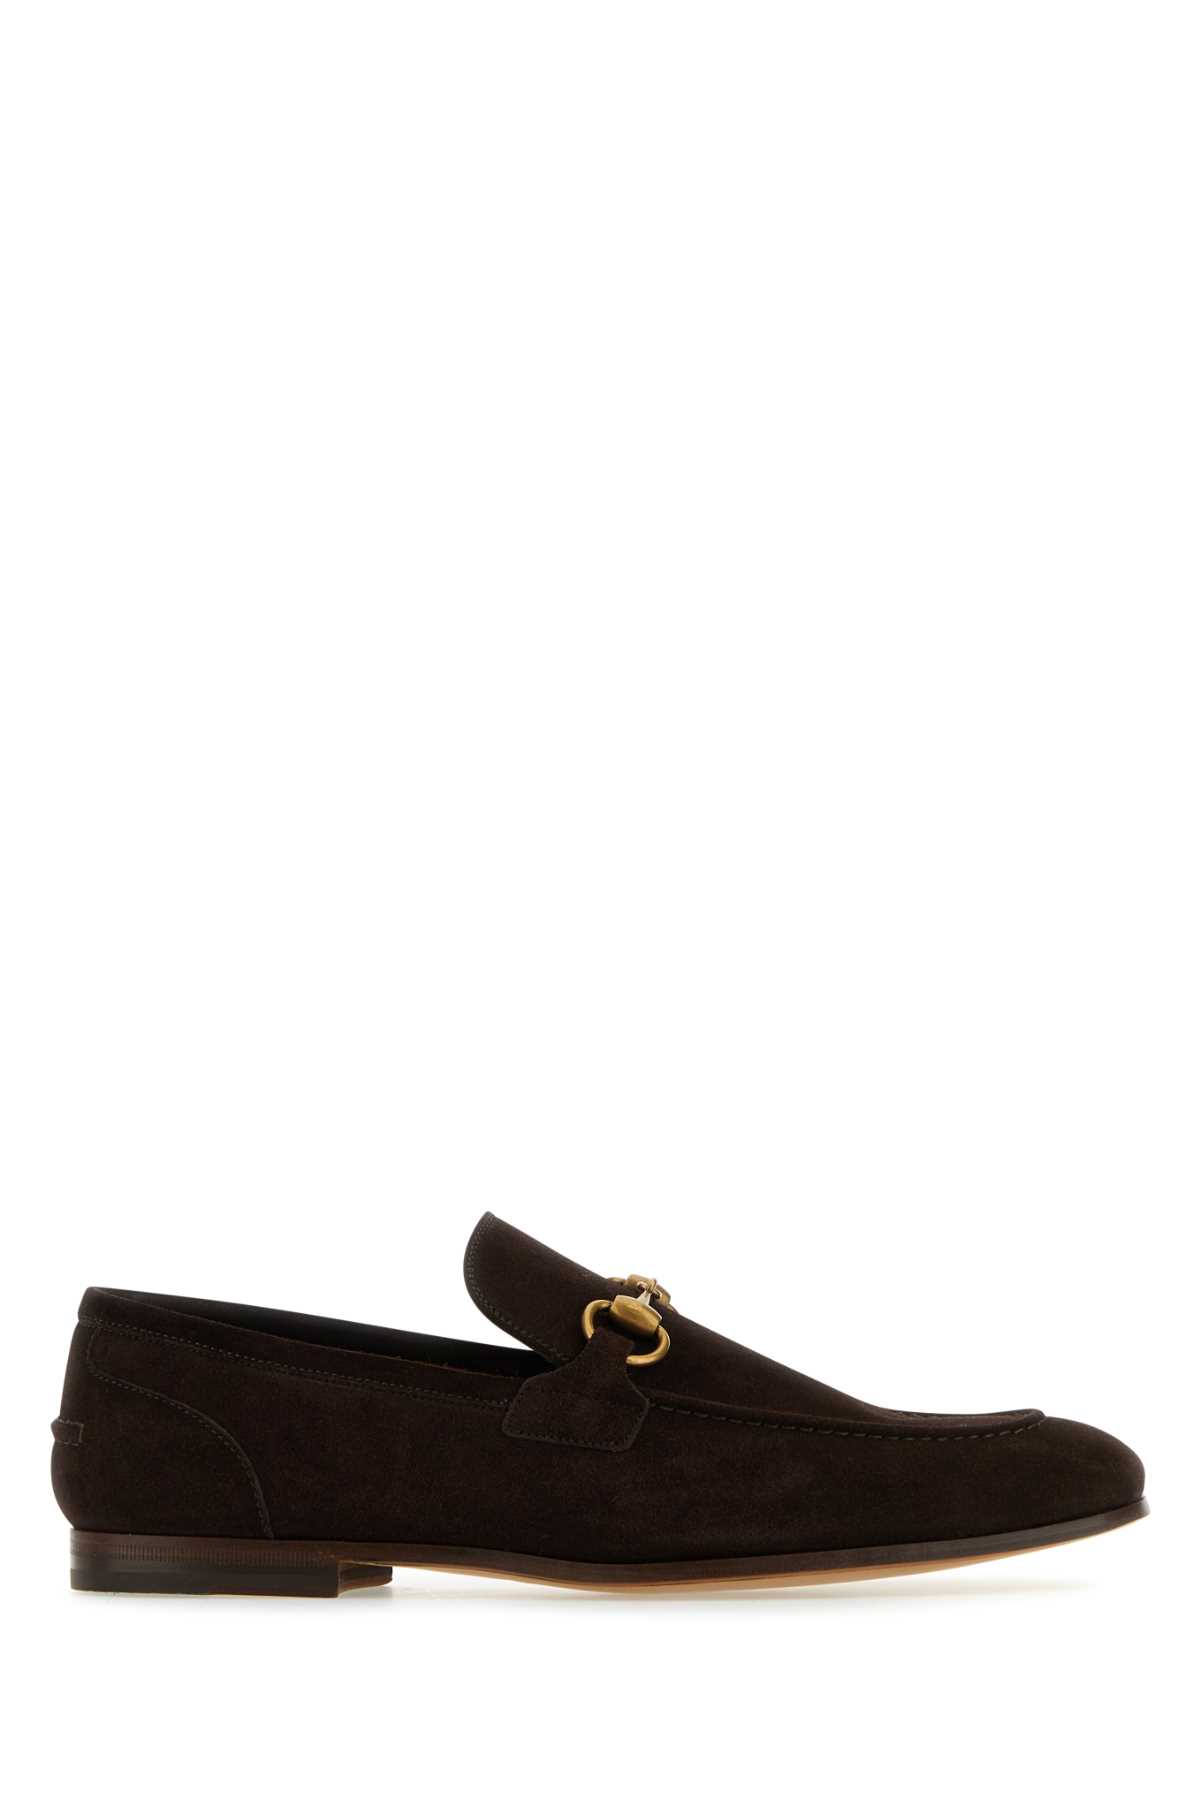 Shop Gucci Chocolate Suede Loafers In Cocoa